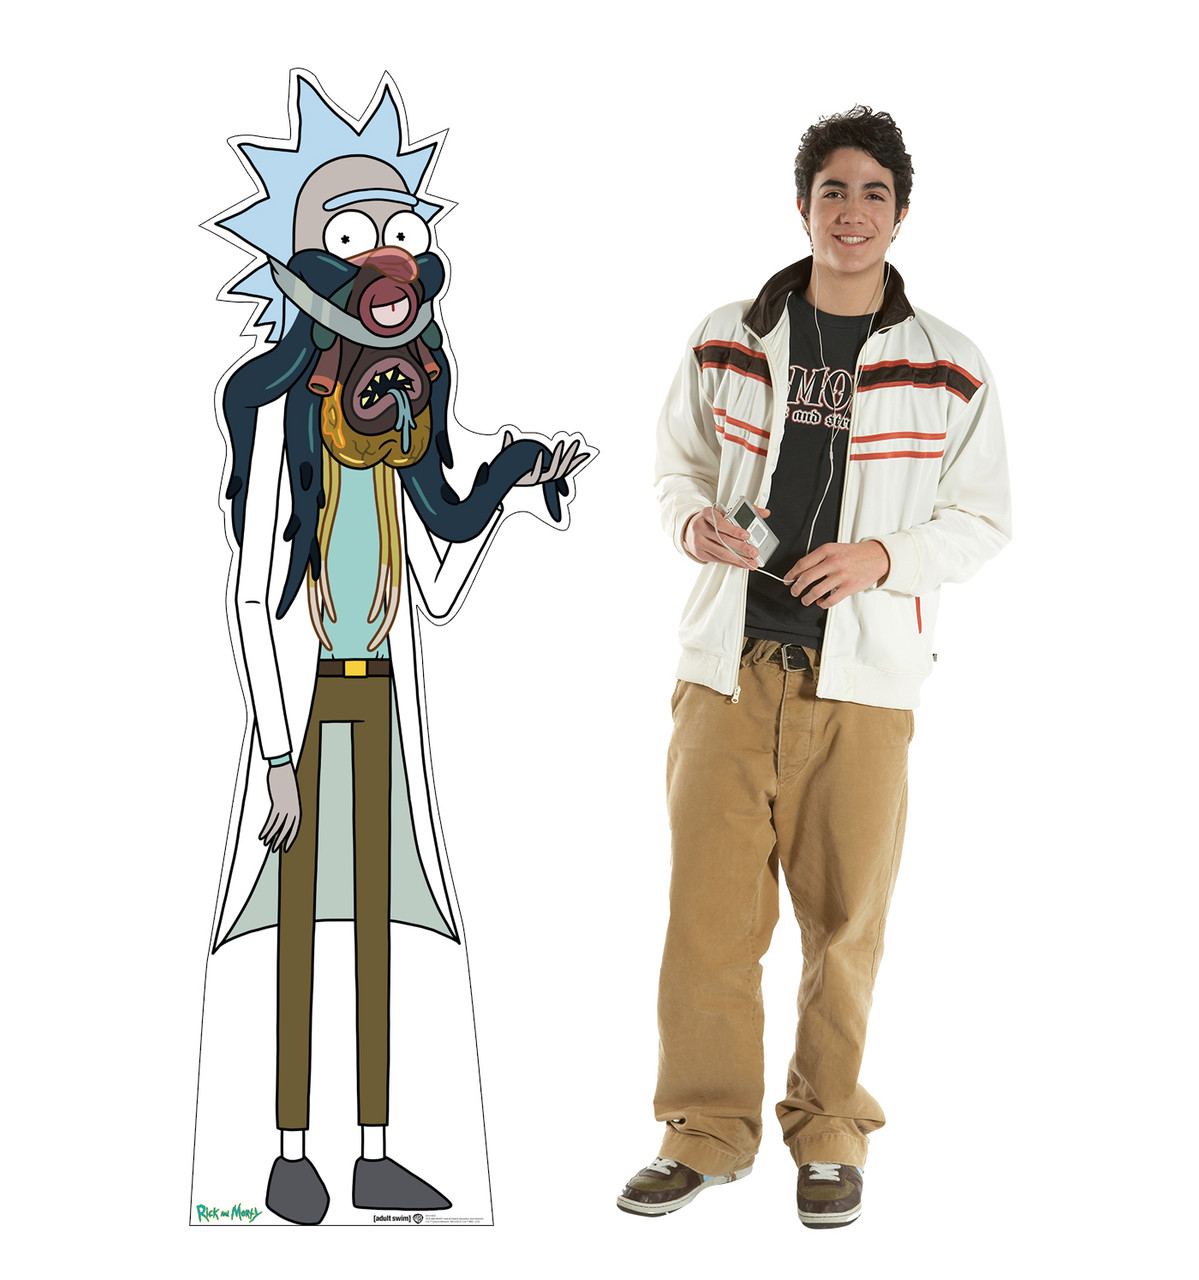 Life-size cardboard standee of Rick from the Rick and Morty TV series with model.